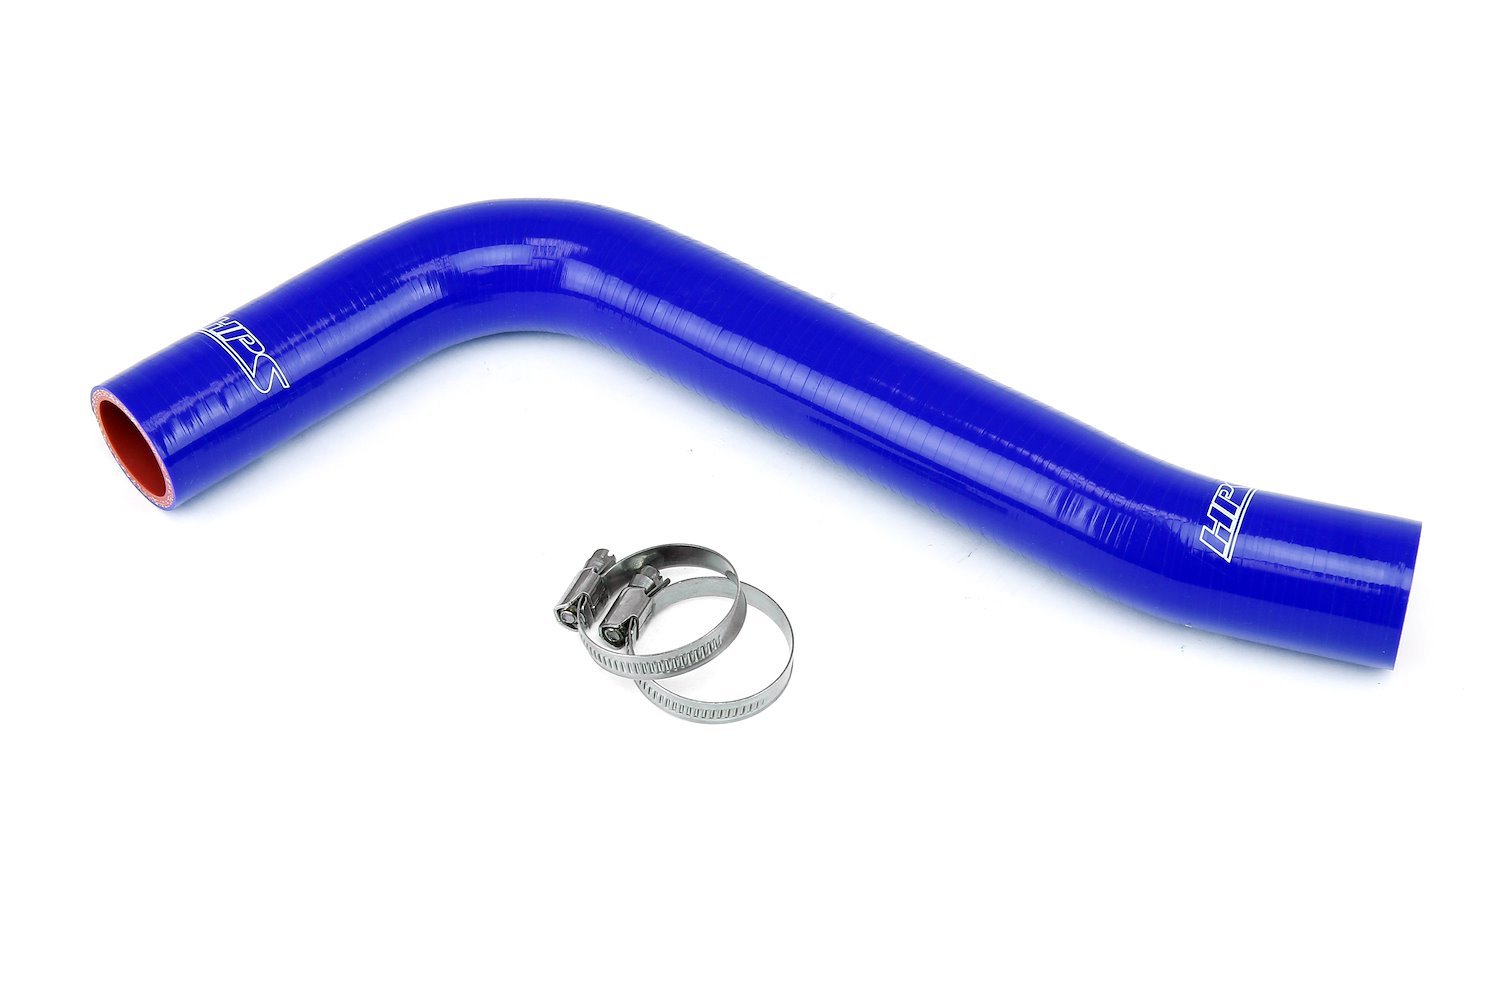 57-1885-BLUE Radiator Hose Kit, 3-Ply Reinforced Silicone, Replaces Lower Rubber Radiator Coolant Hose.